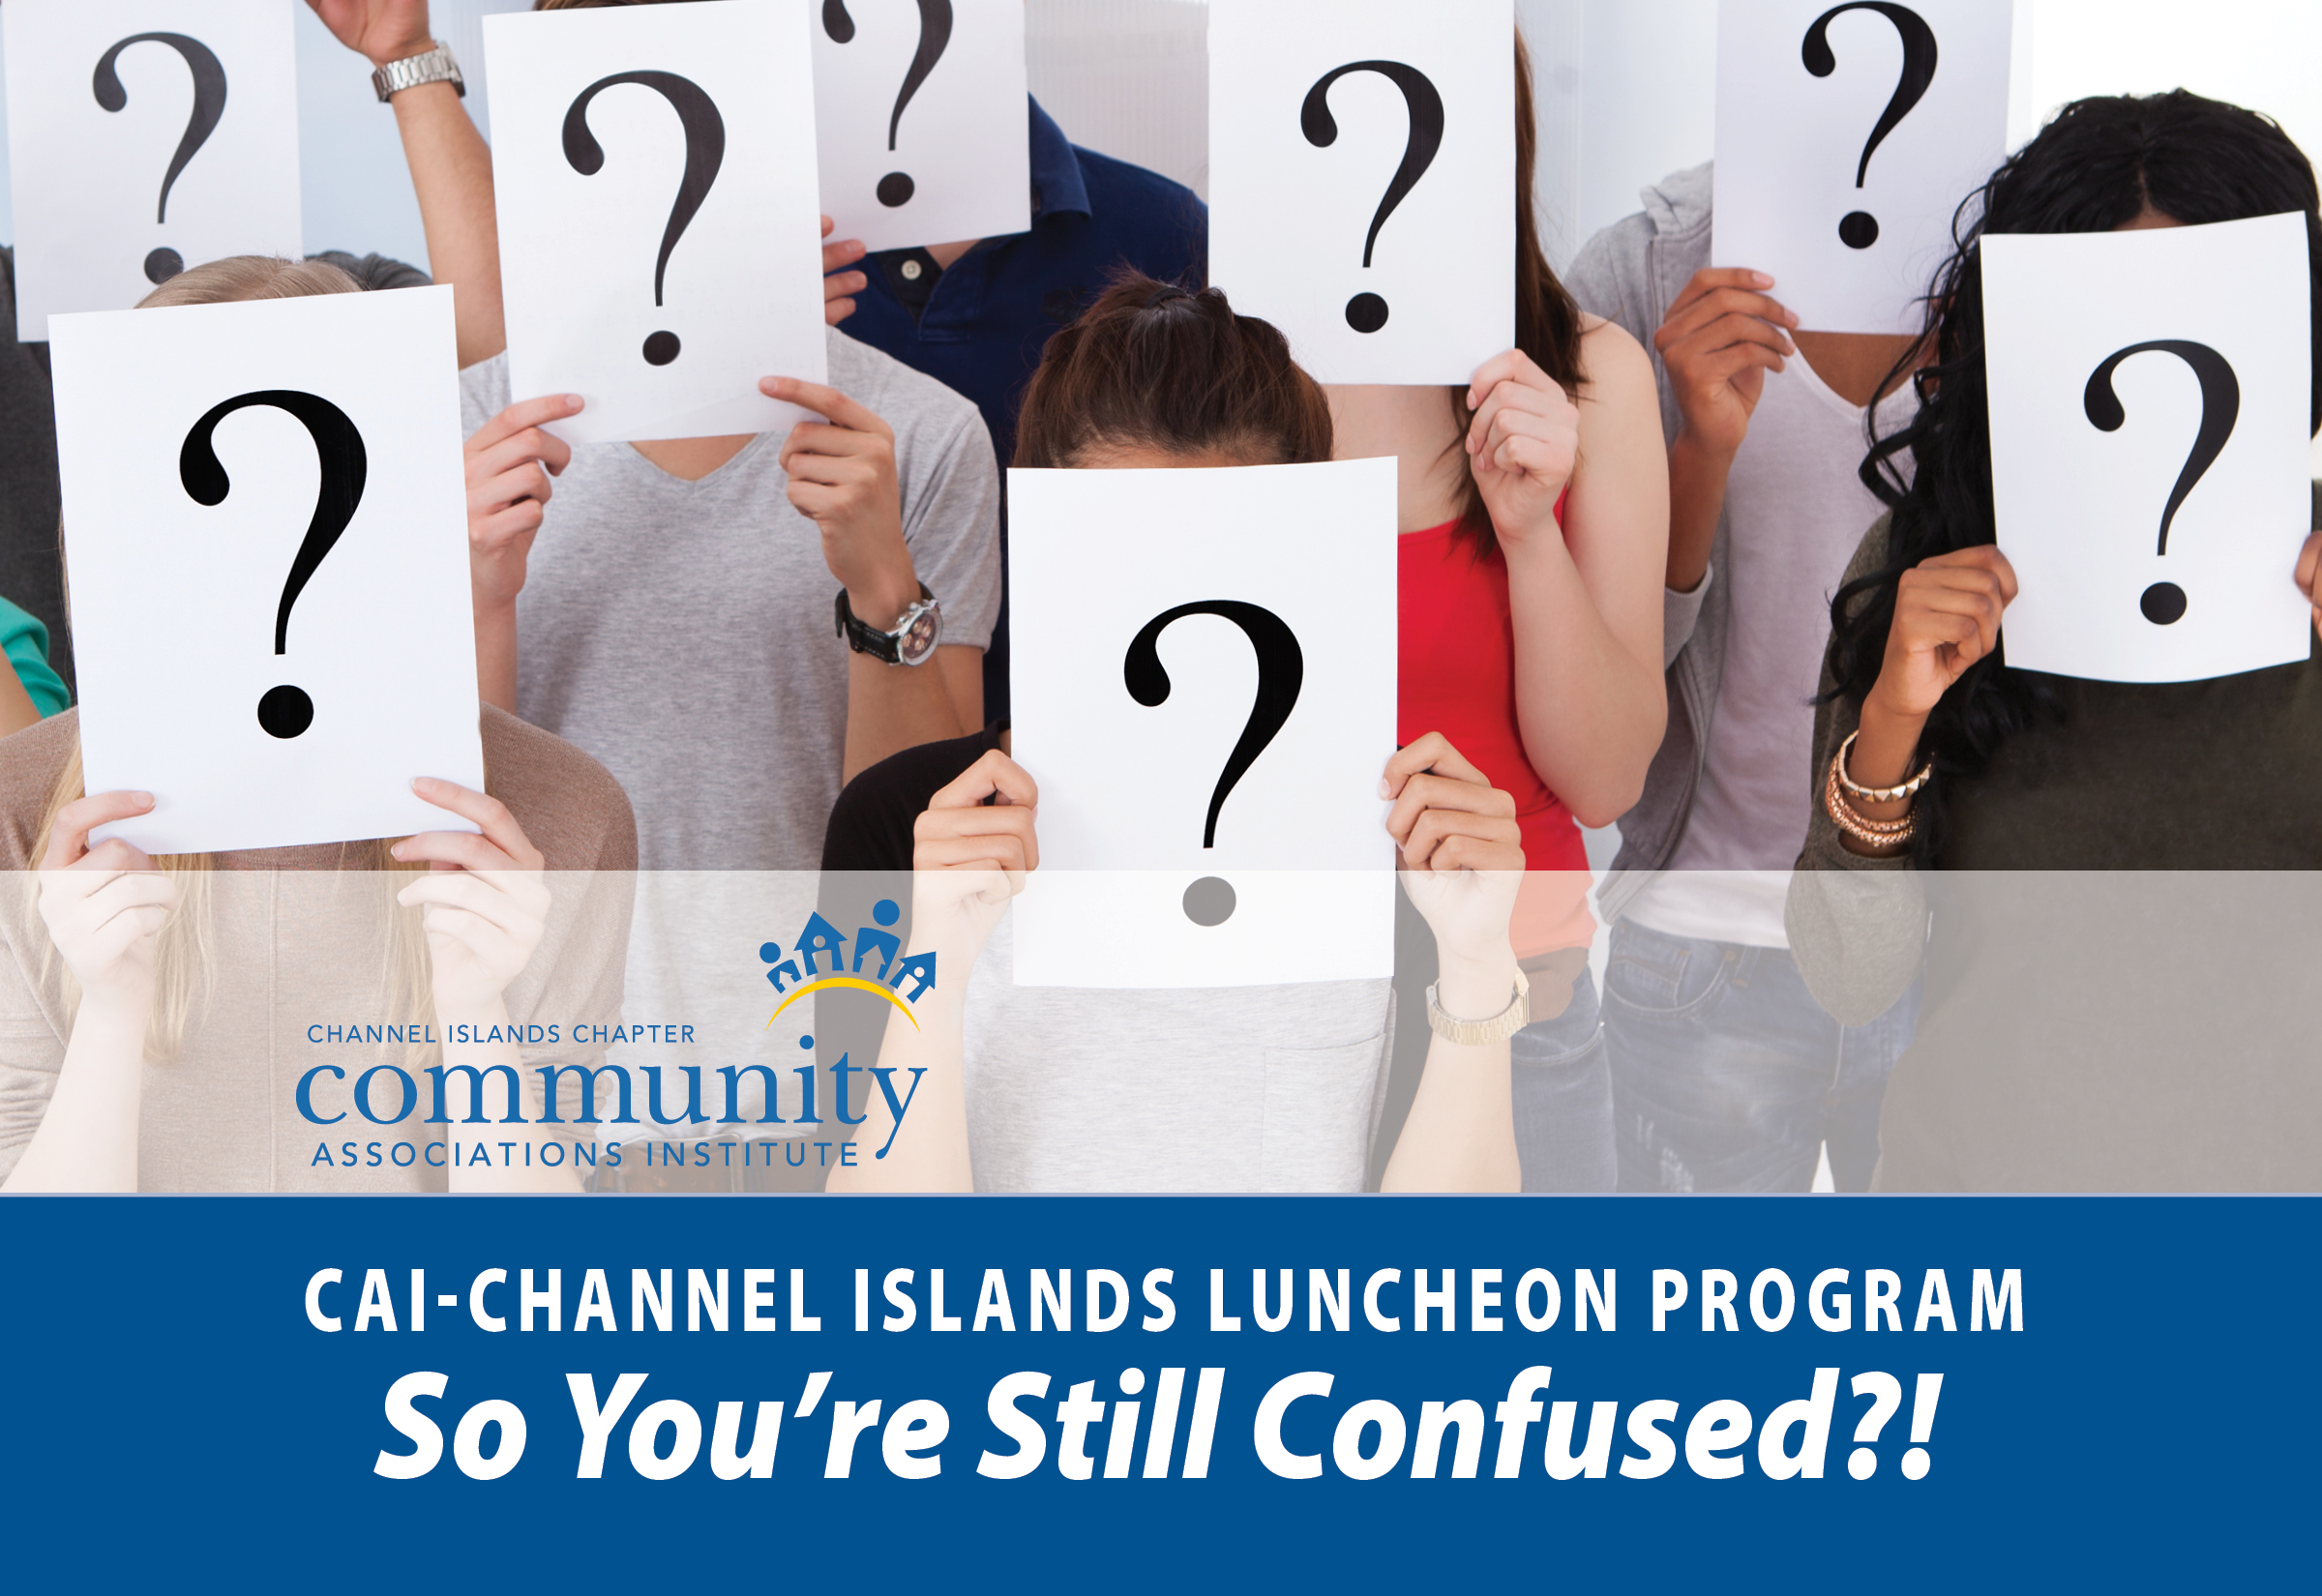 Chapter Luncheon Program: So You're Still Confused?!